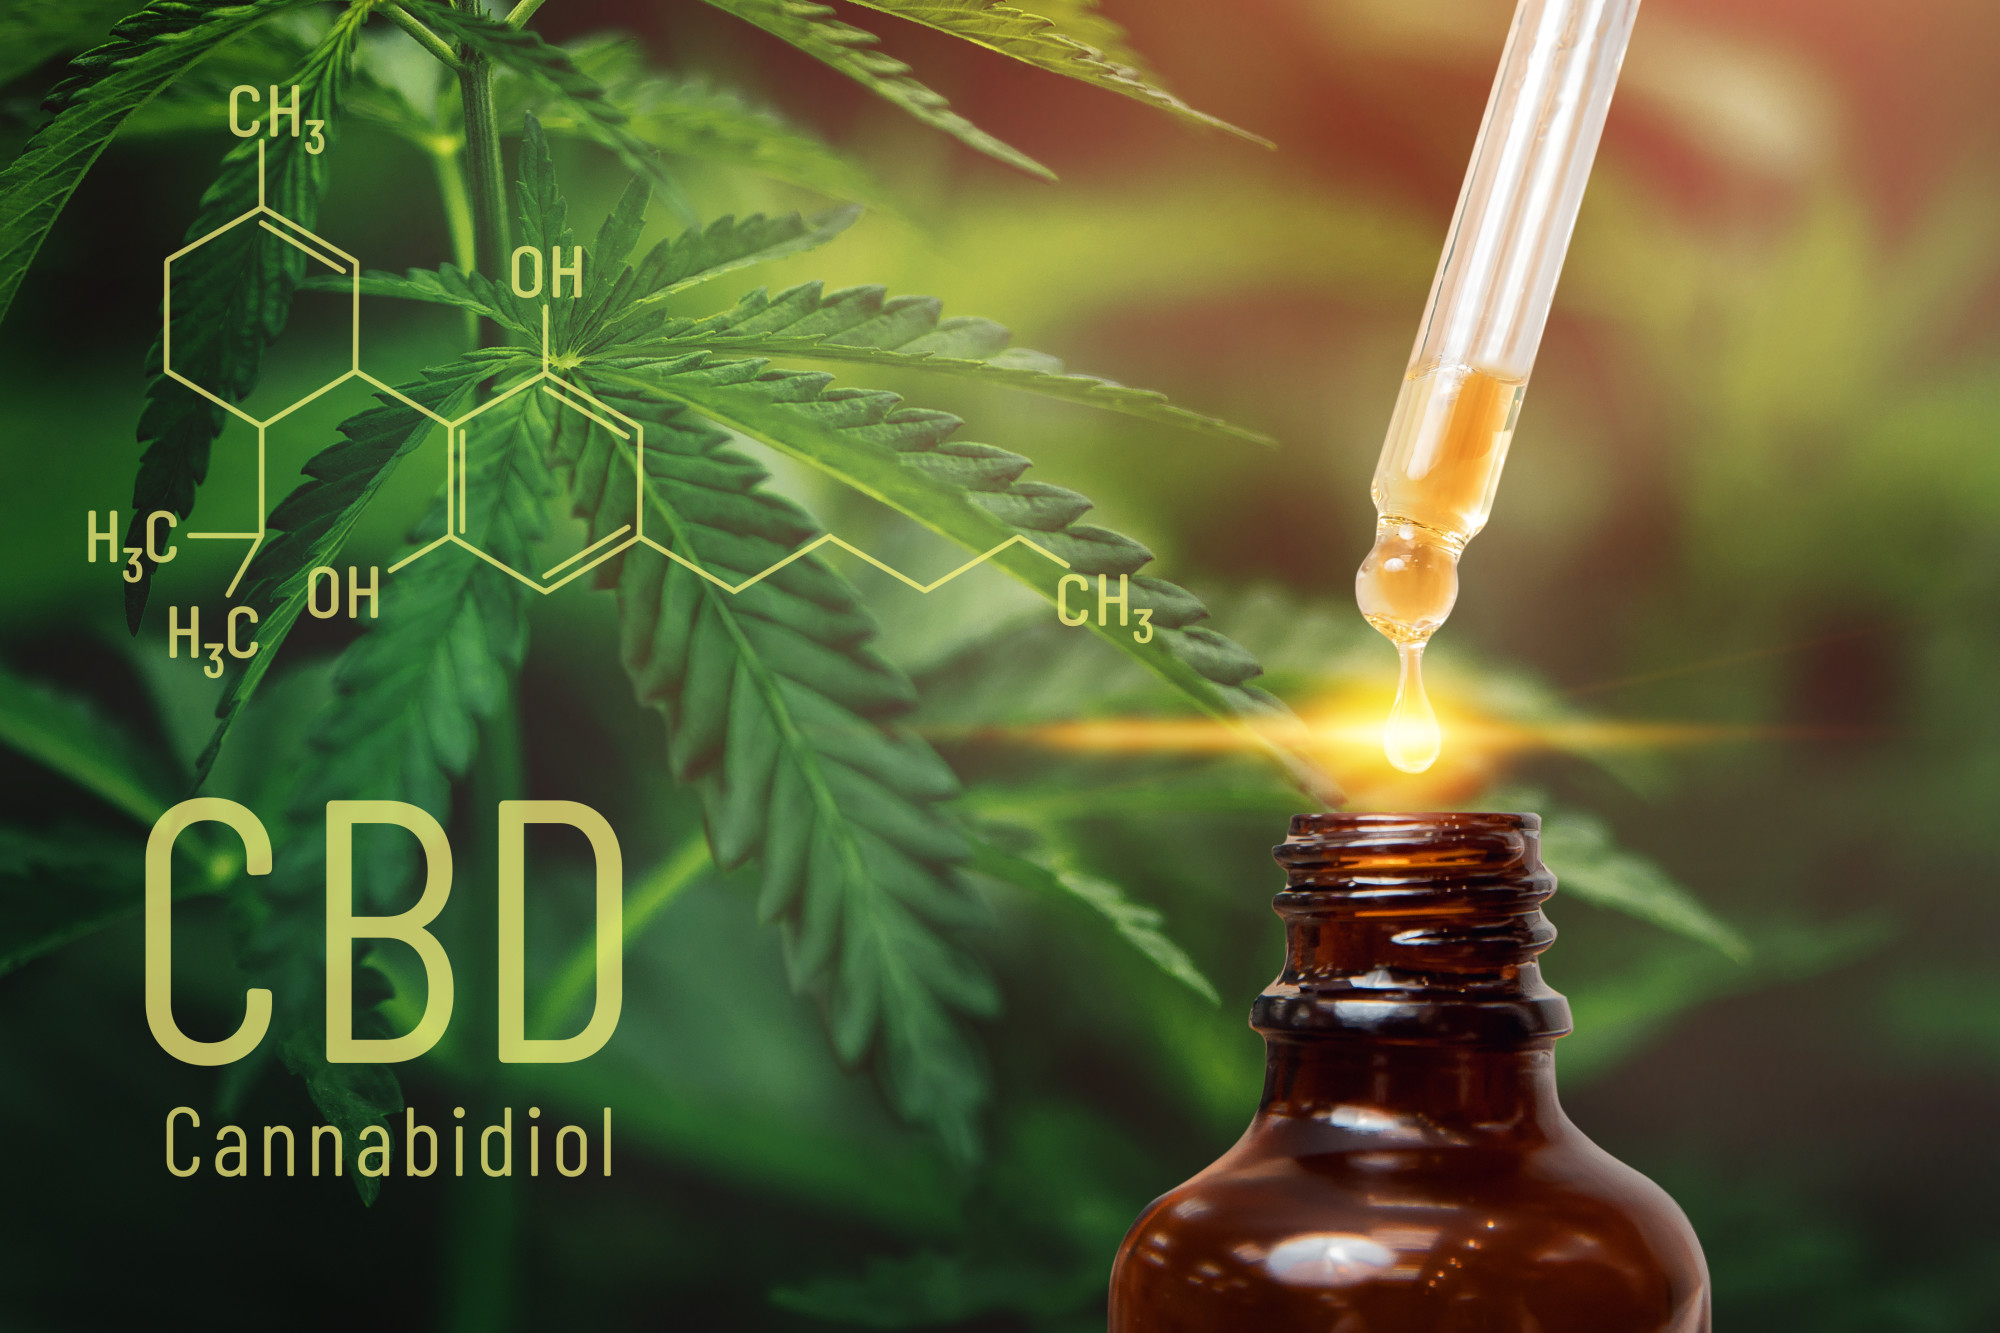 How Does CBD Make You Feel? Facts About CBD and Why It Doesn't Get You High